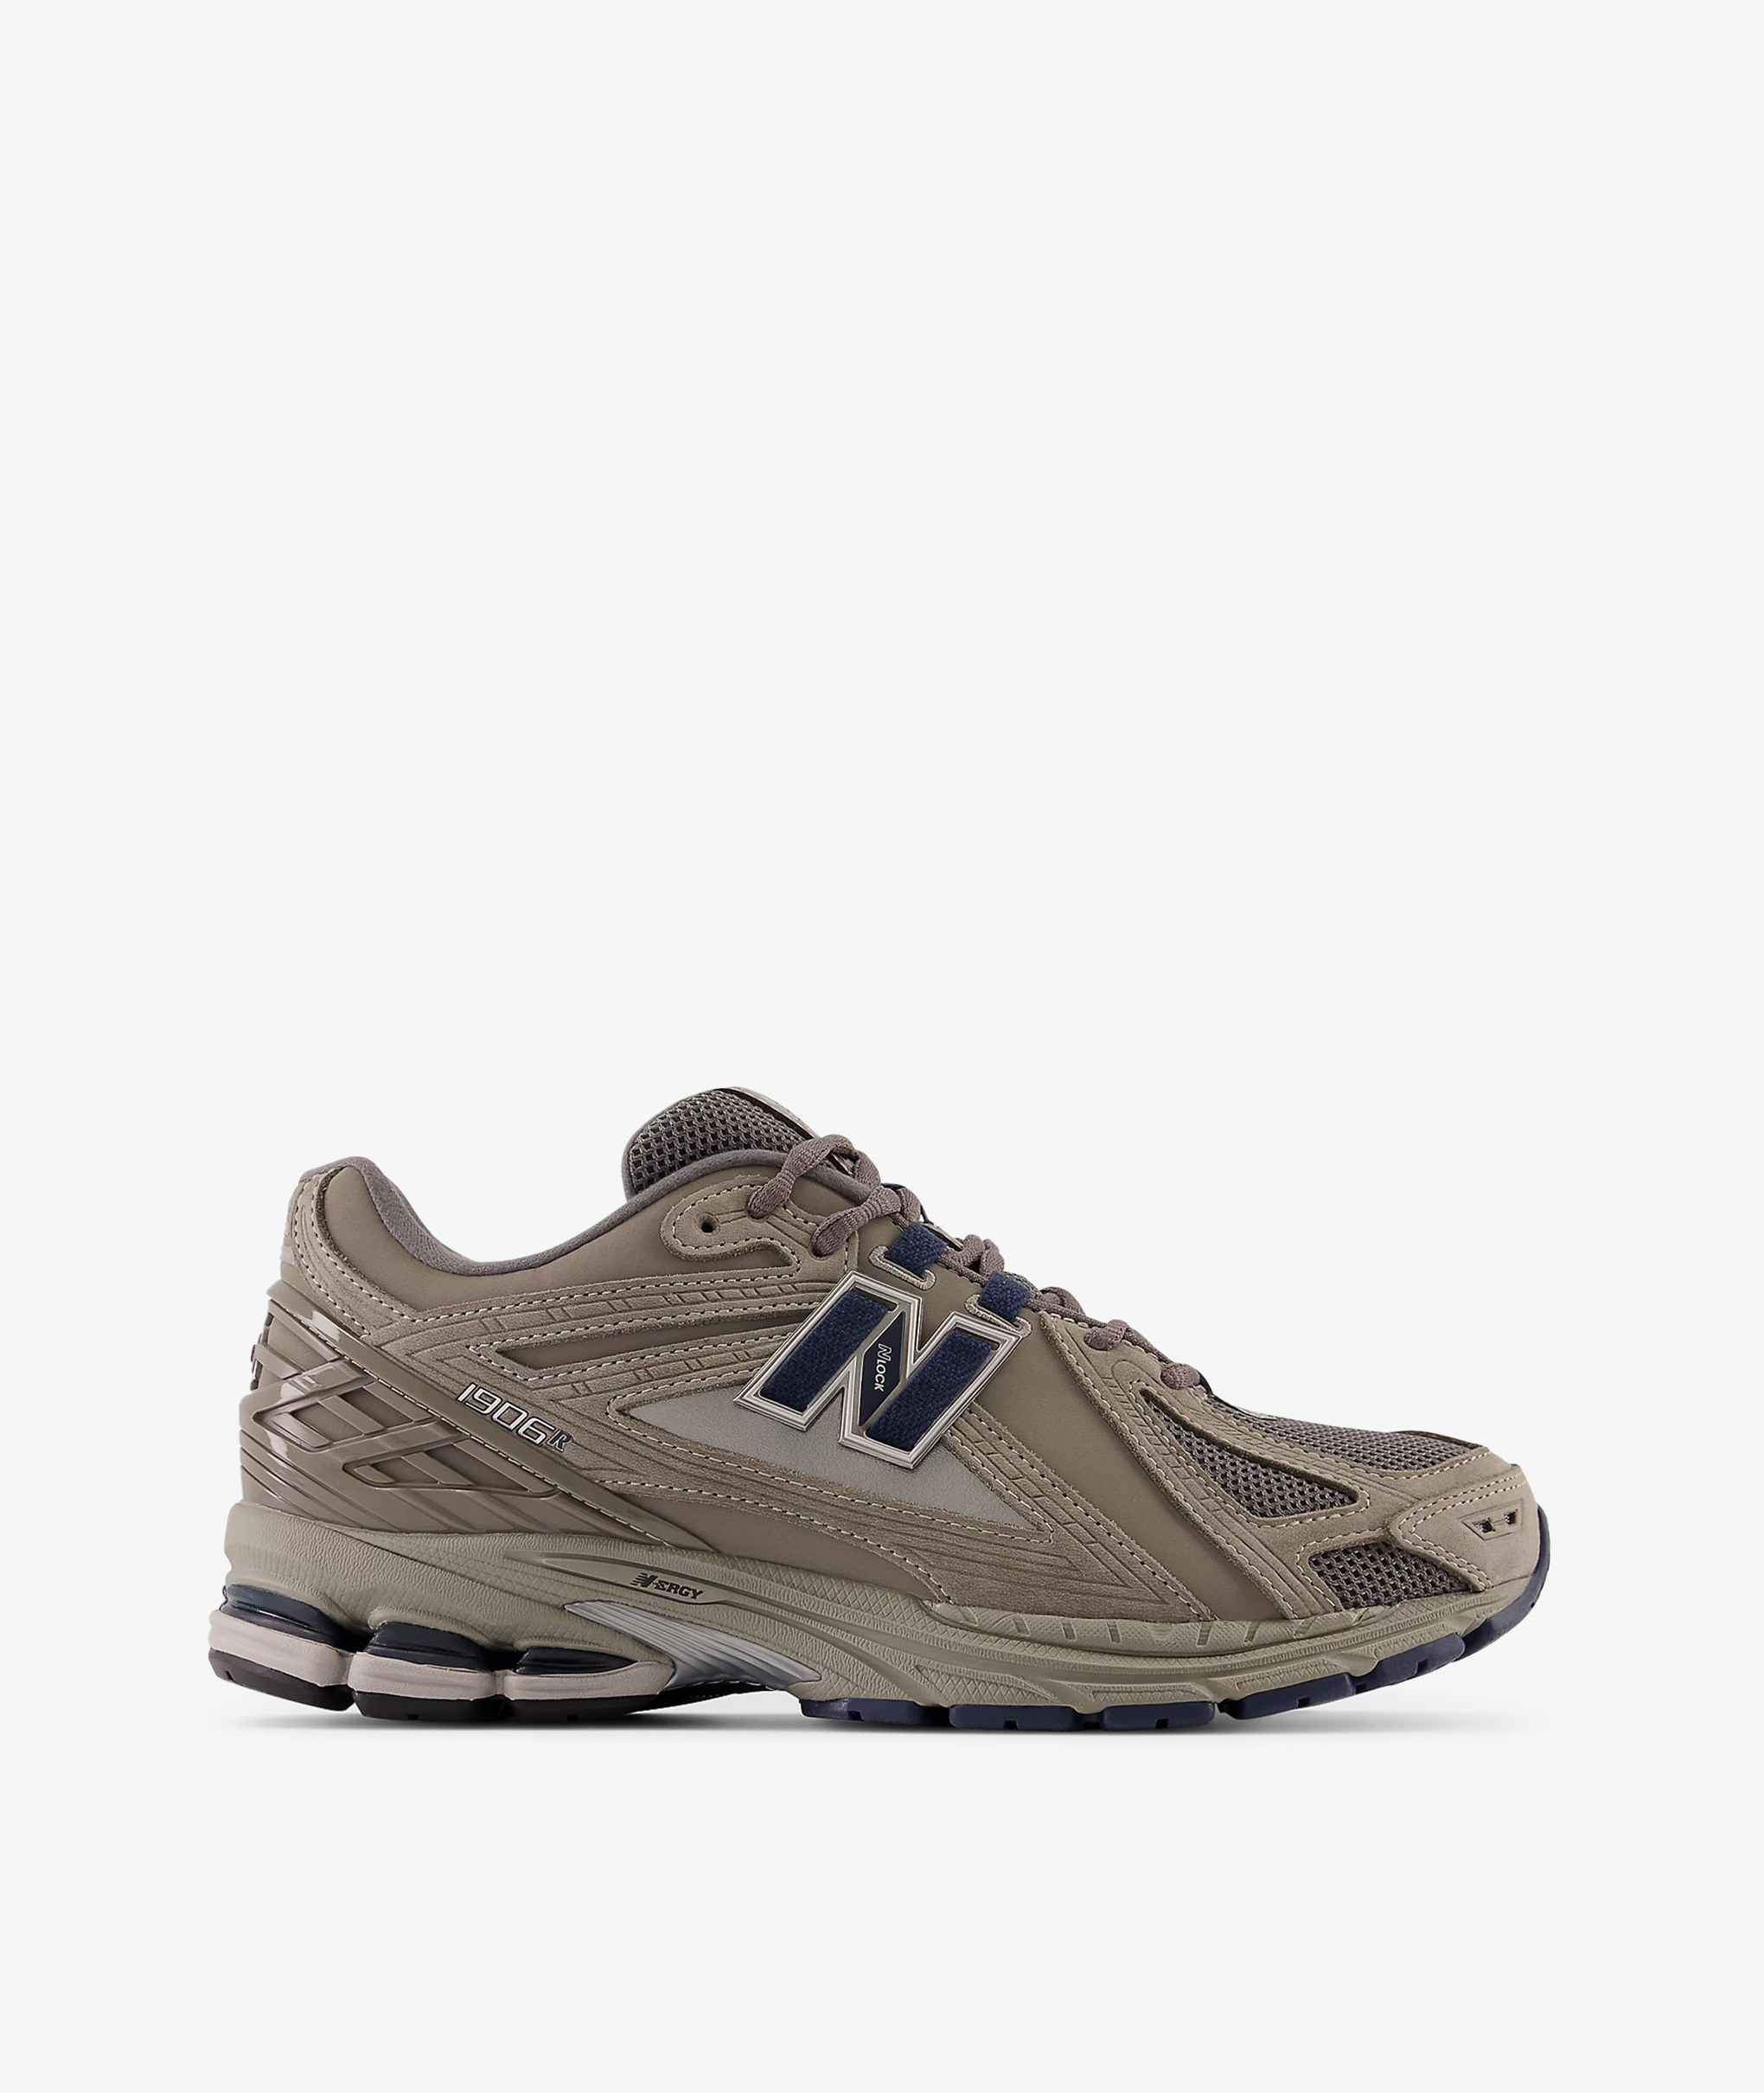 Norse Store | Shipping Worldwide - New Balance M1906RB 